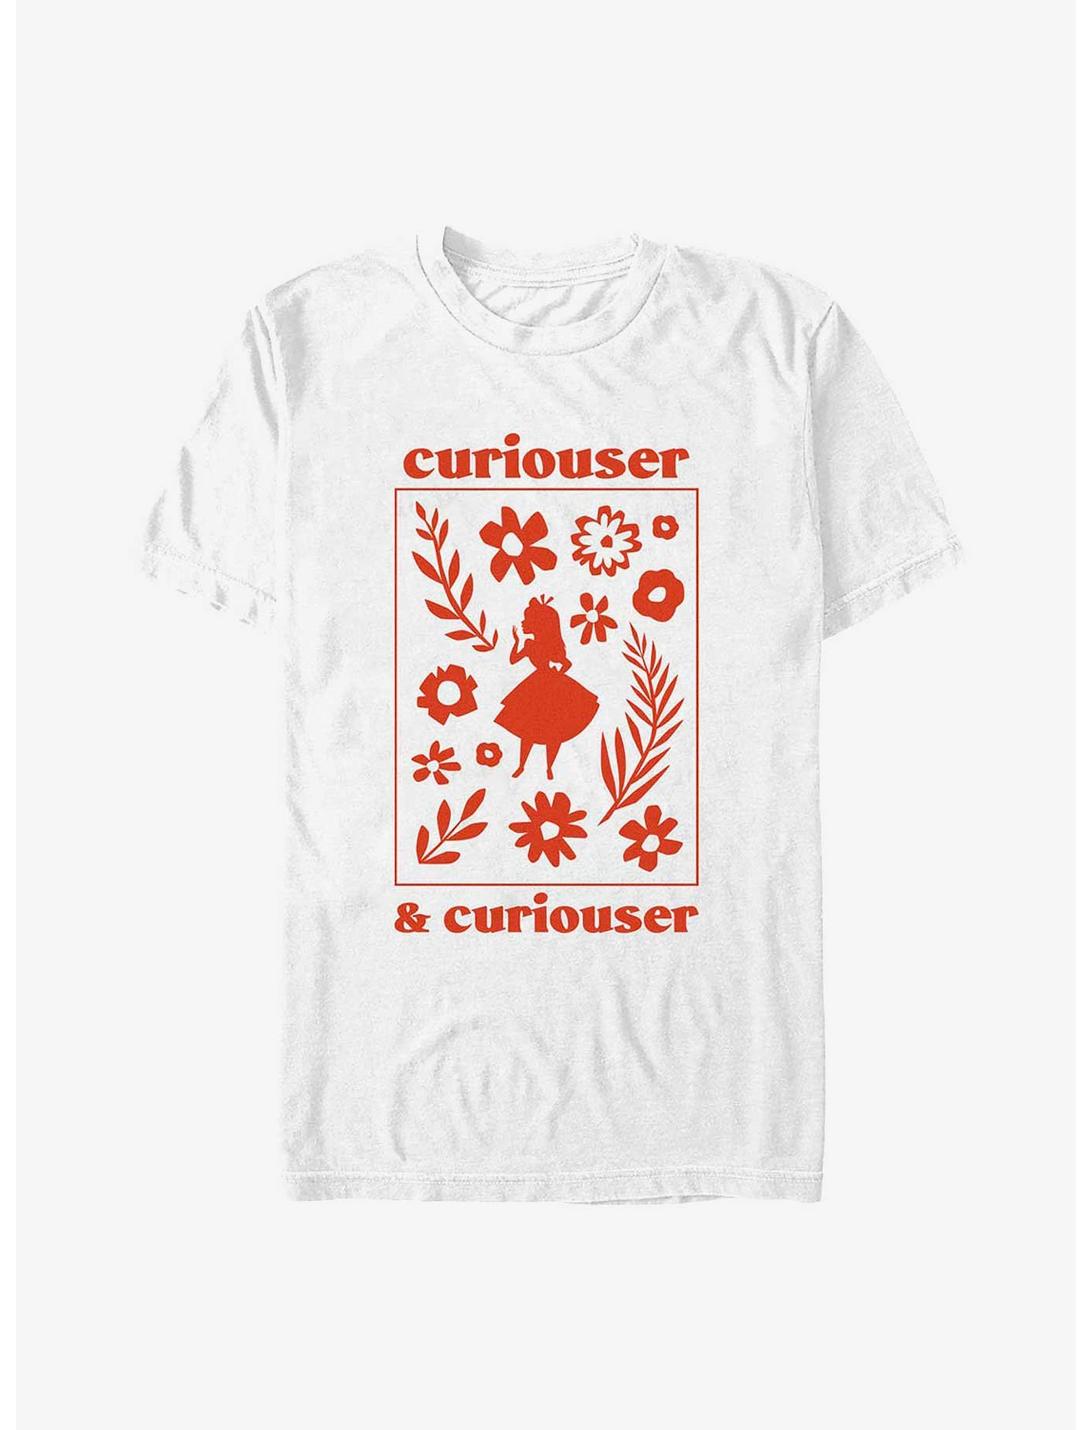 Disney Alice In Wonderland Curiouser and Curiouser T-Shirt, WHITE, hi-res